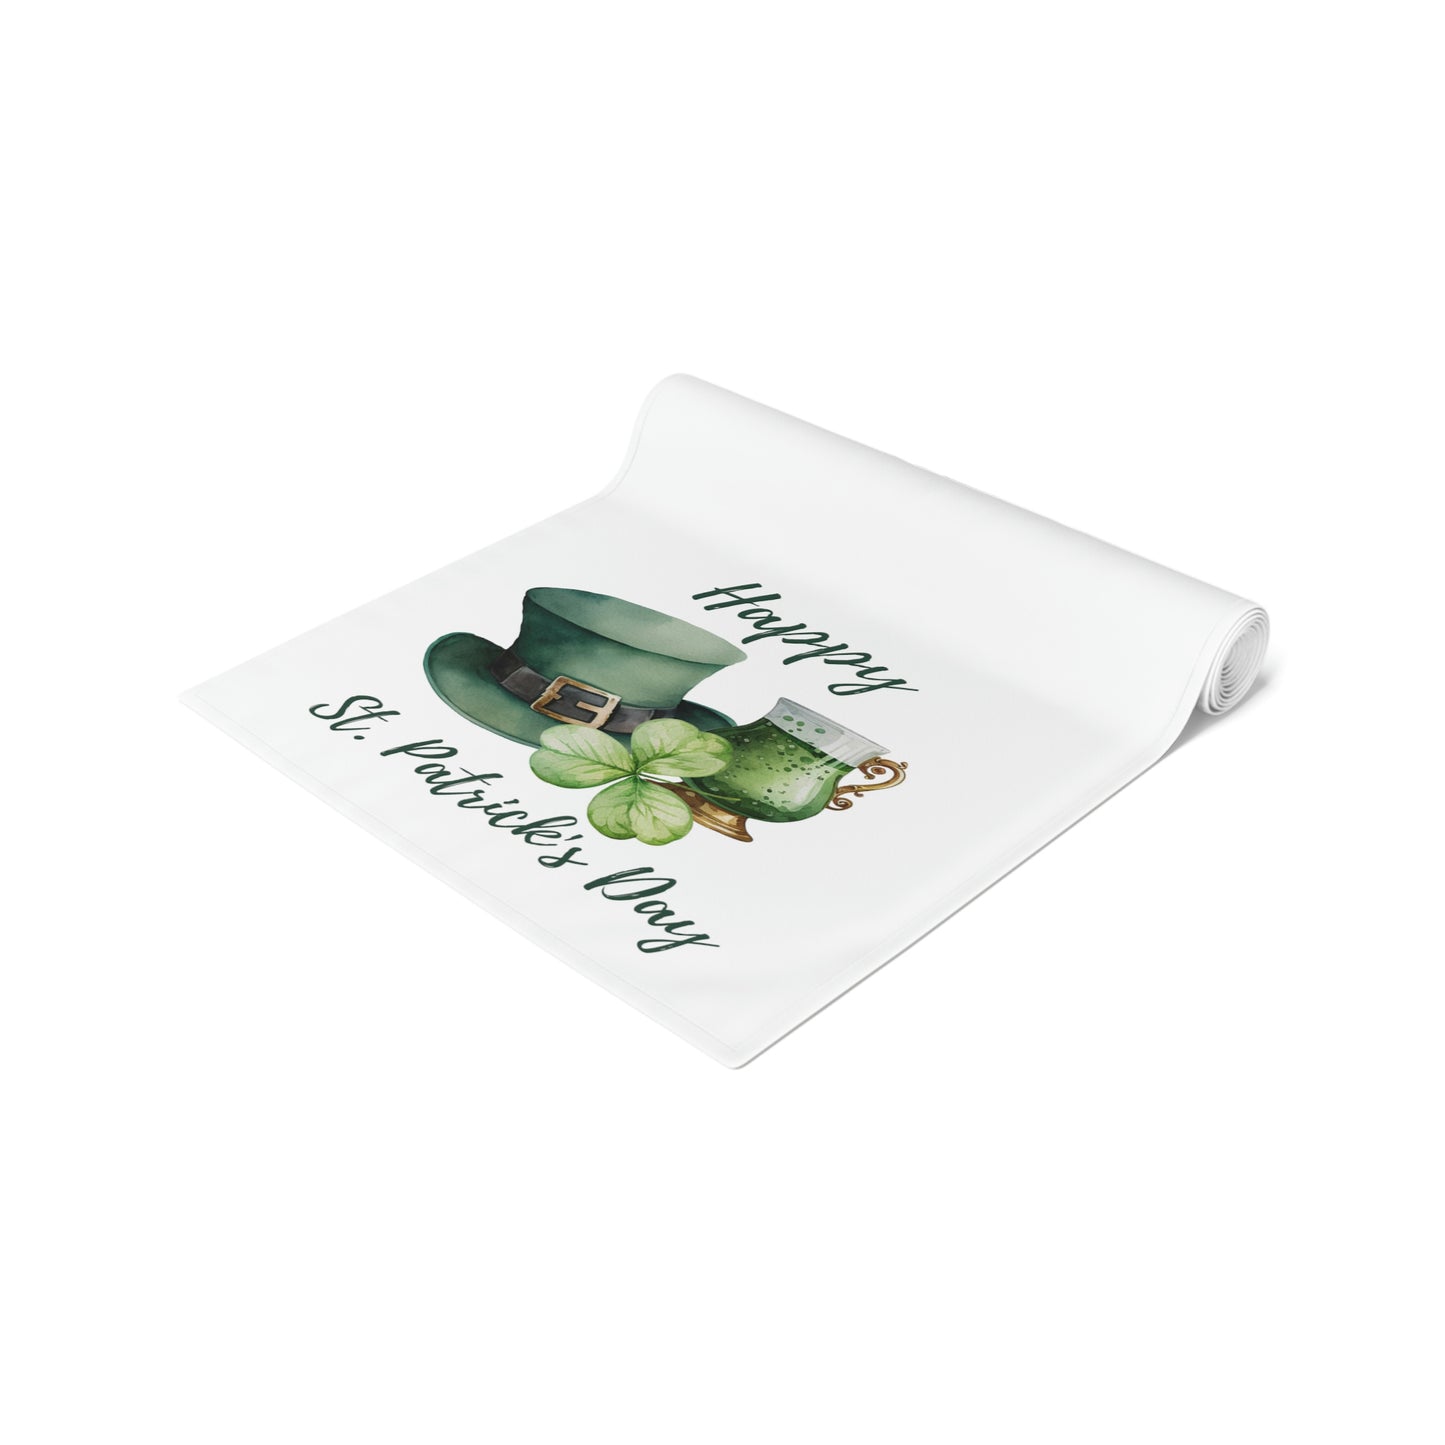 St Patrick's Day Table Runner / St Patrick's Day Decor / Shamrock Decor / St Patricks Table Decor / Green Table Decor